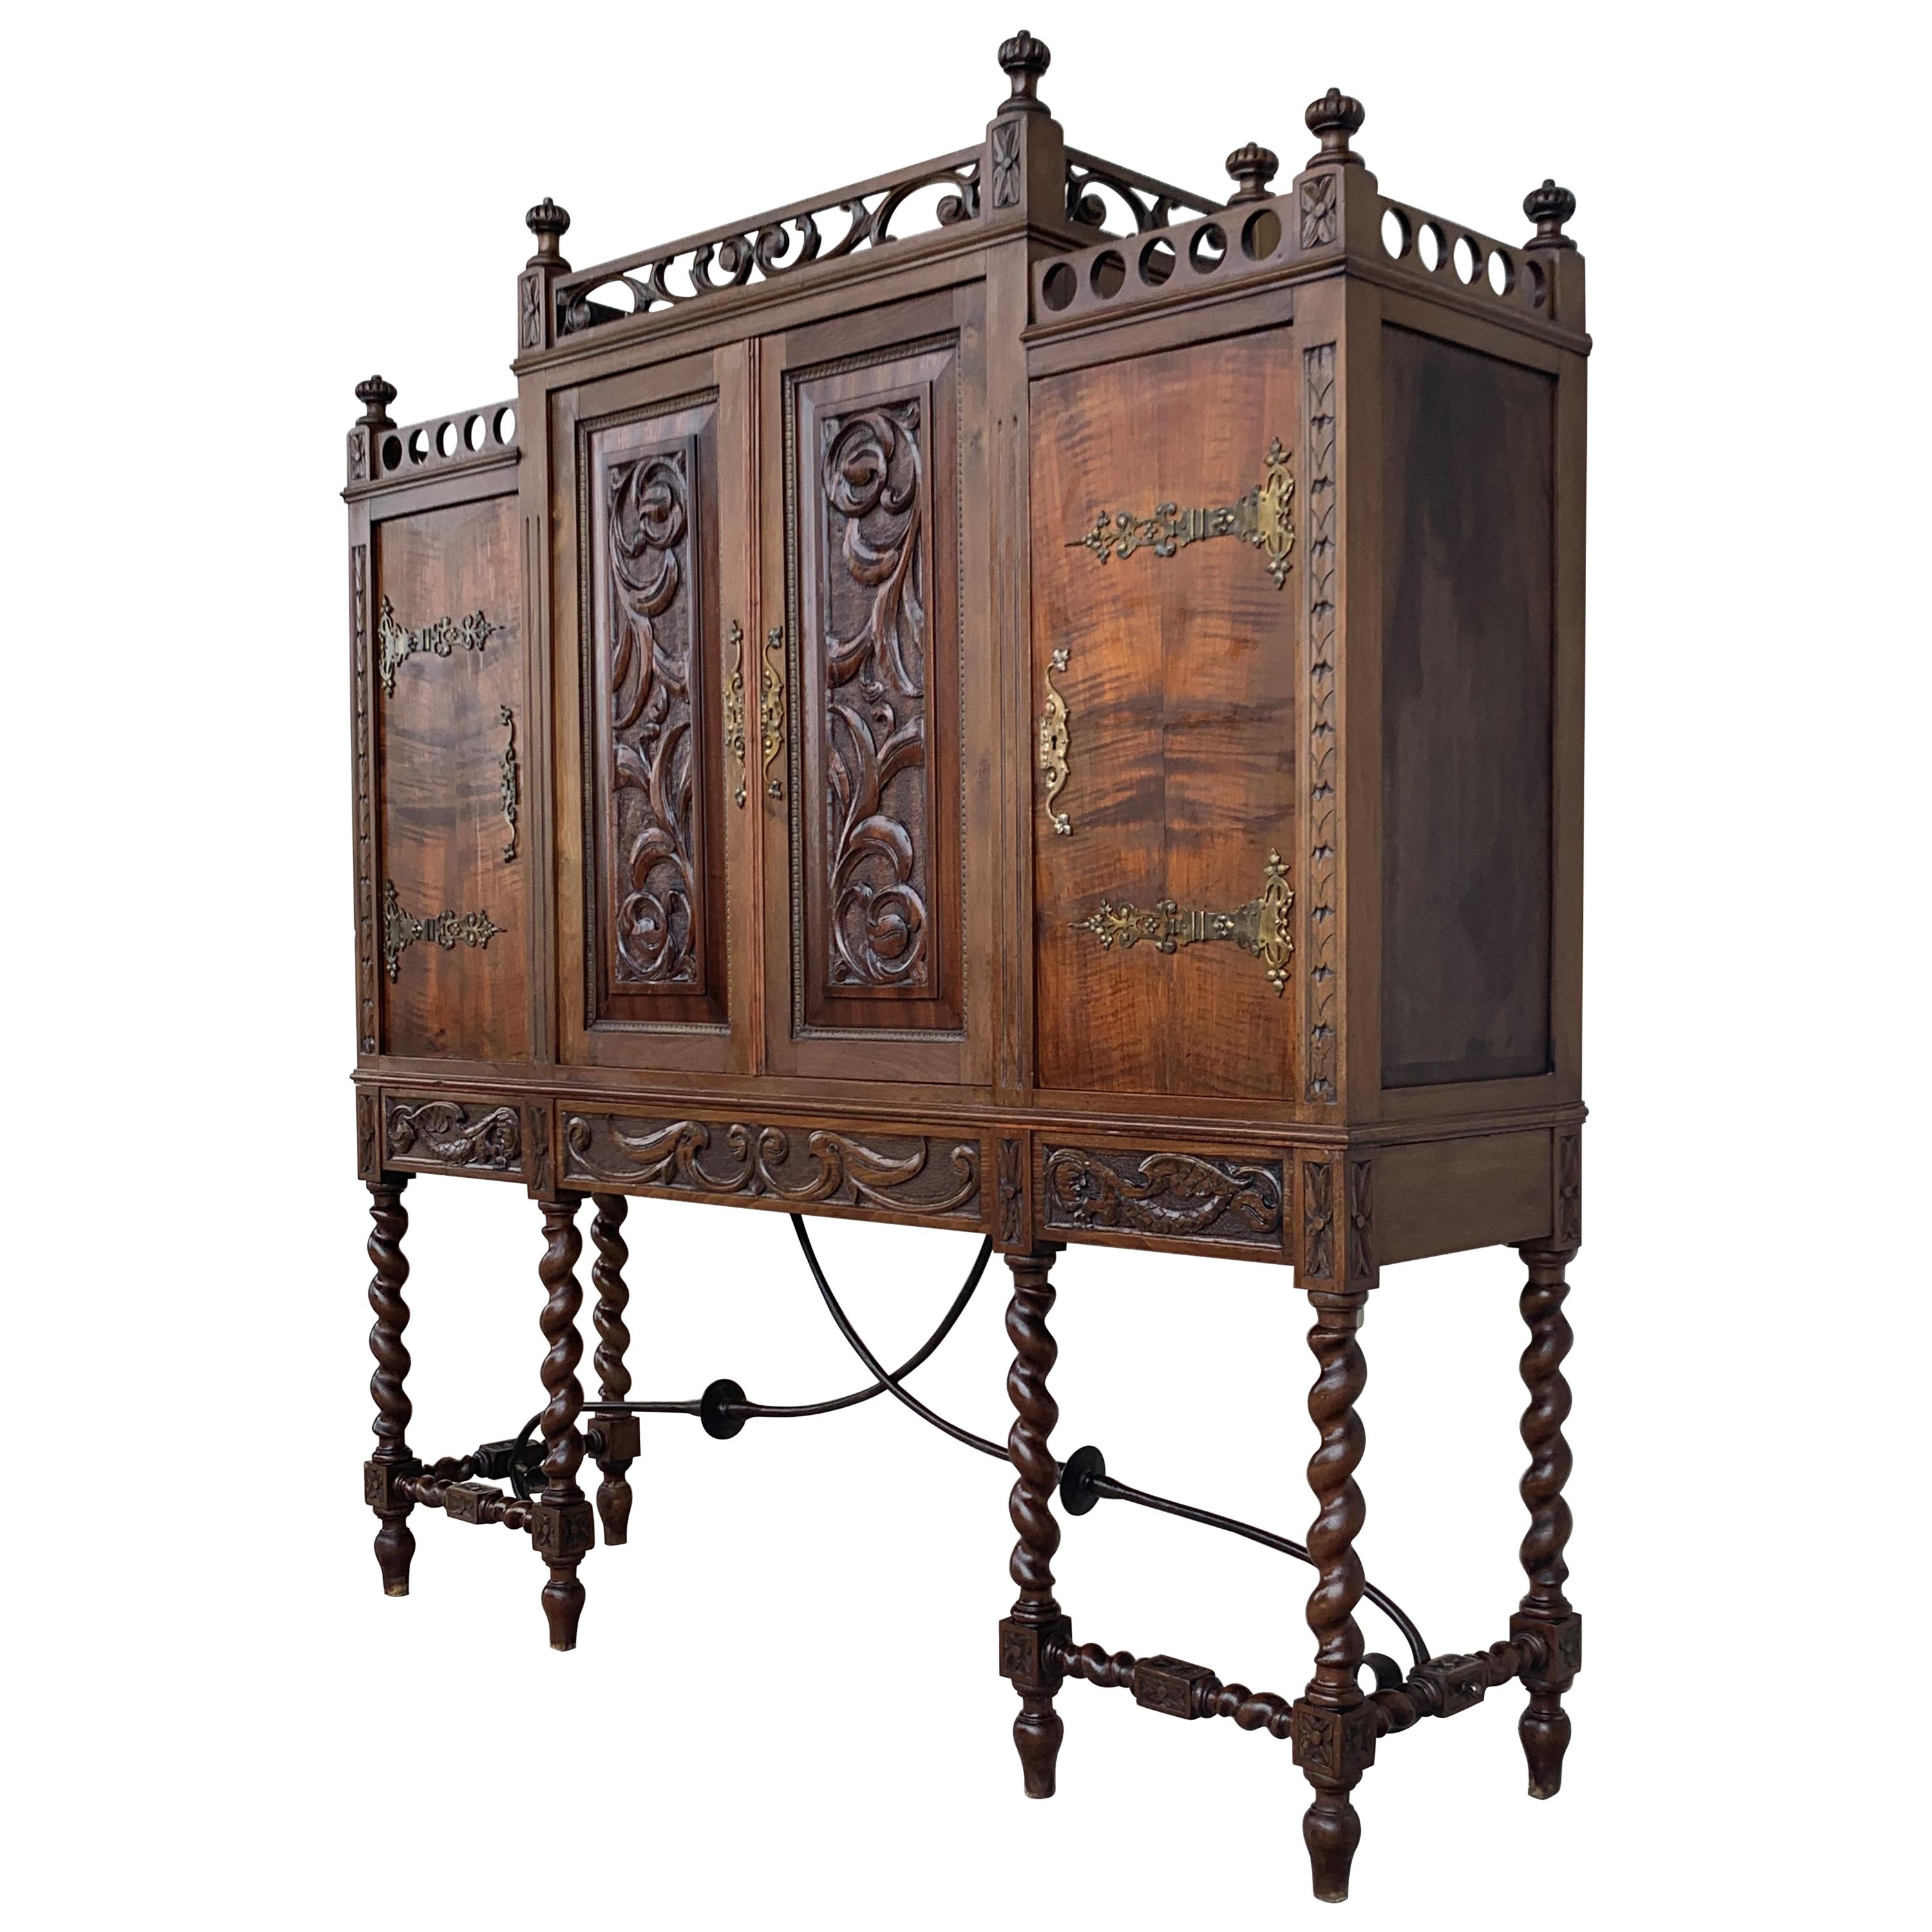 19th Century Wood Carved Cupboard, Cabinet on Stand with Iron Stretcher